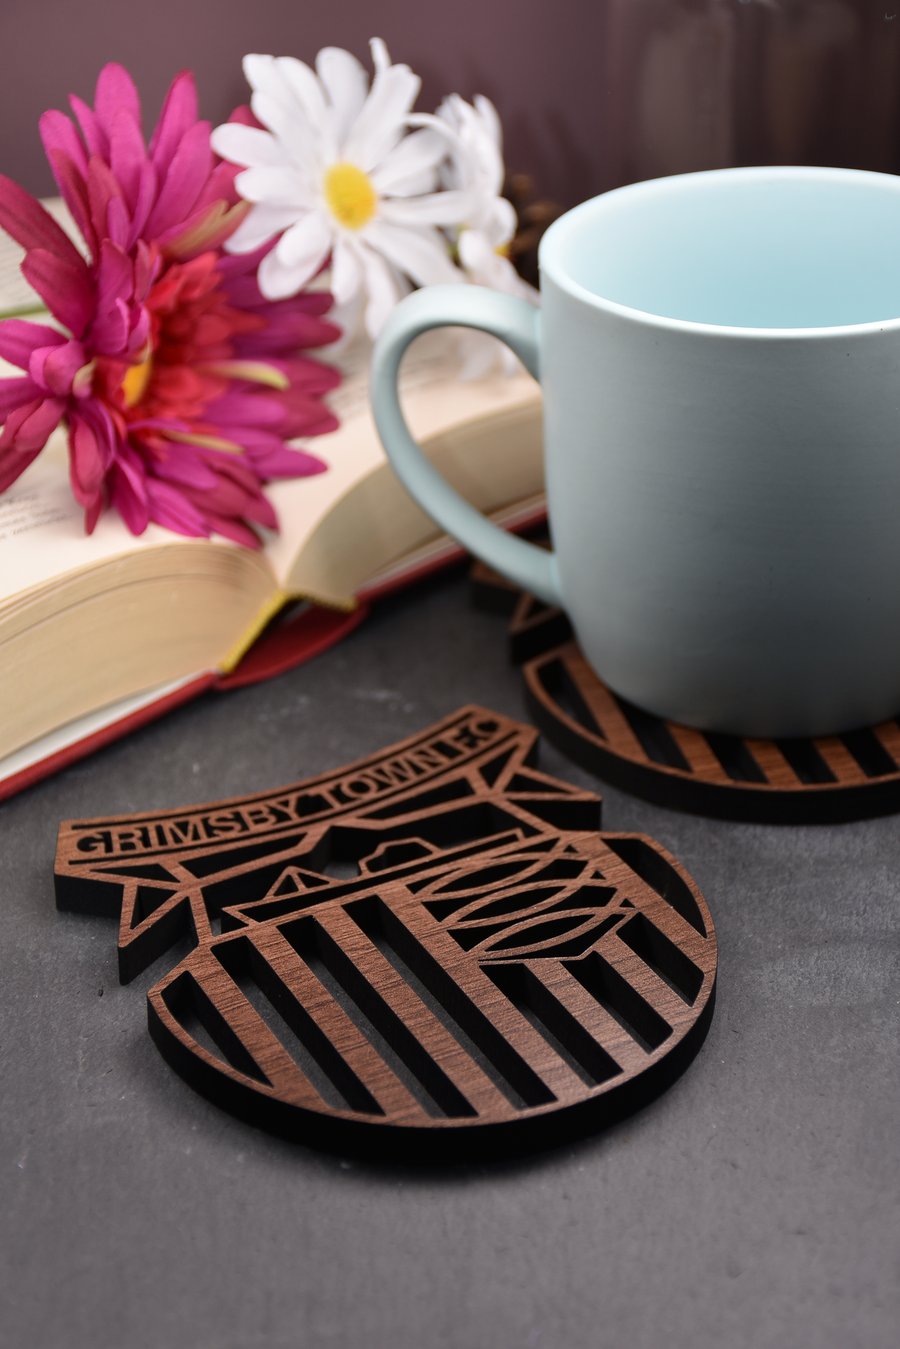 Individual Grimsby Town Coasters - Grimsby Town lovers - Grimsby Town Obsessives